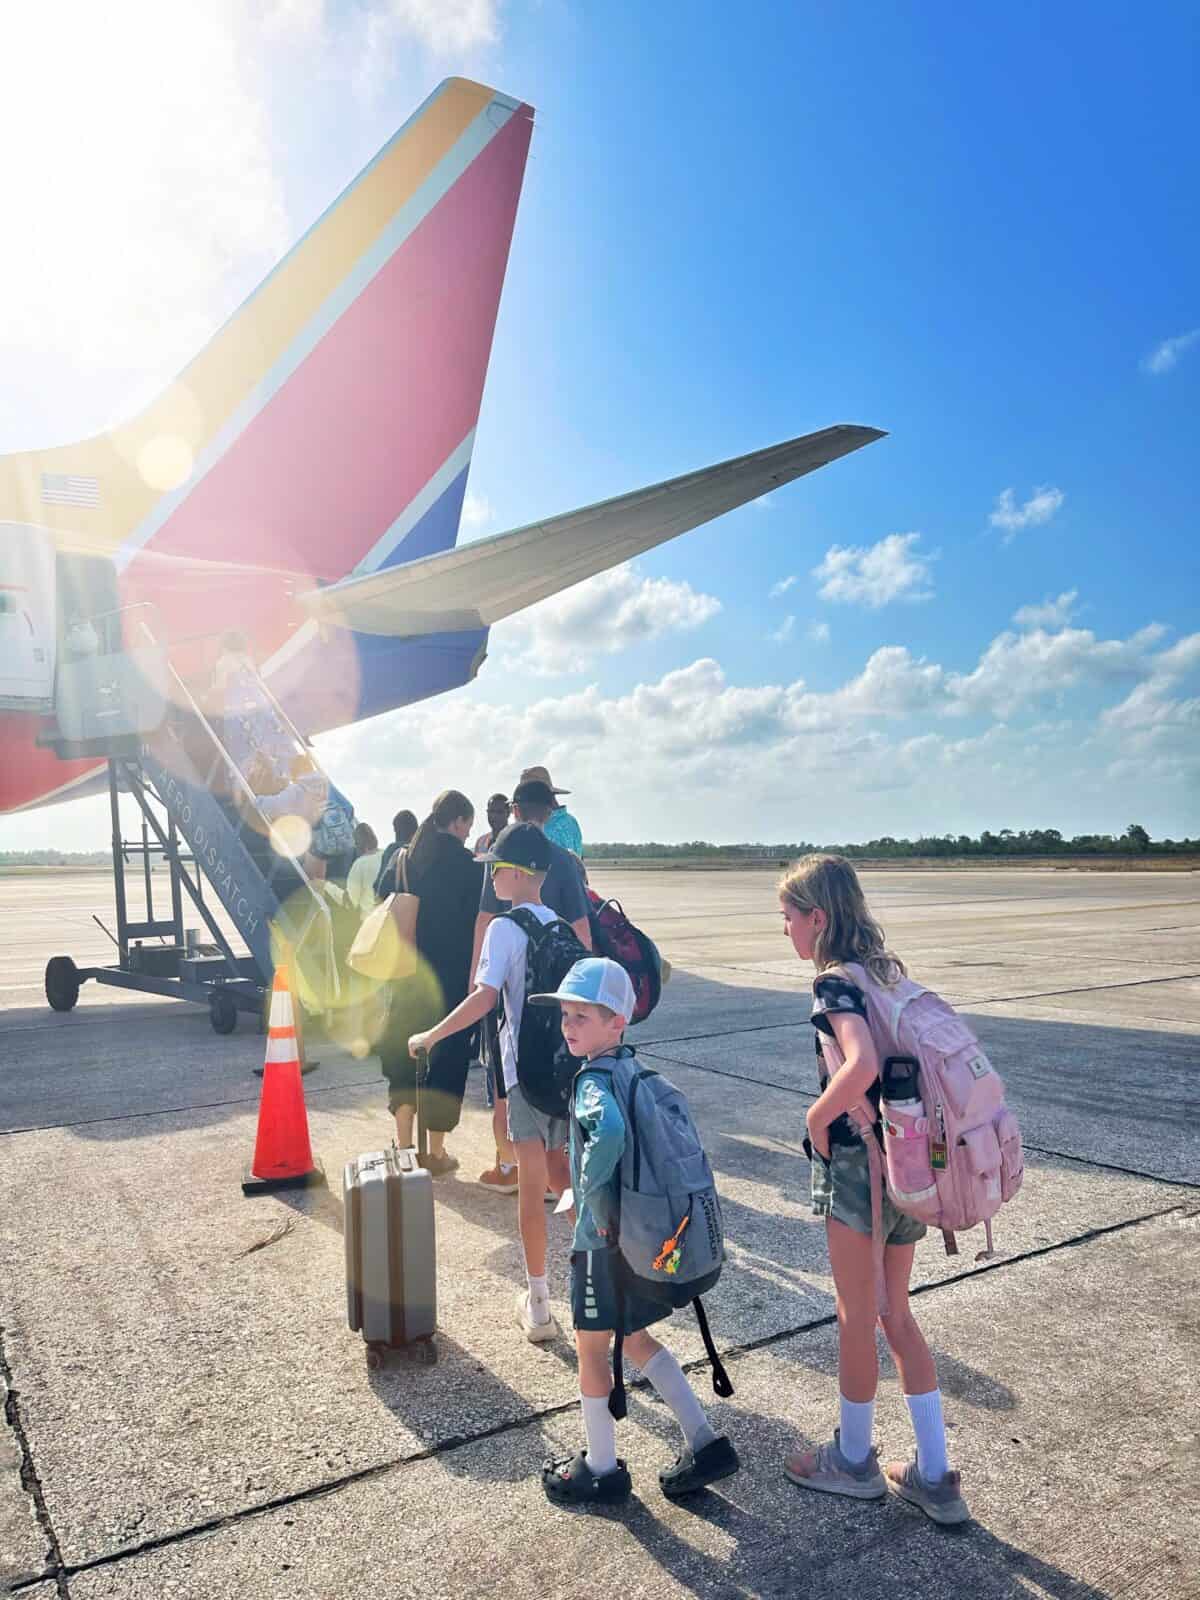 Traveling from the US to Belize is easier than you might expect - photo of kids standing in front of Southwest Airlines plane from Houston to Belize City